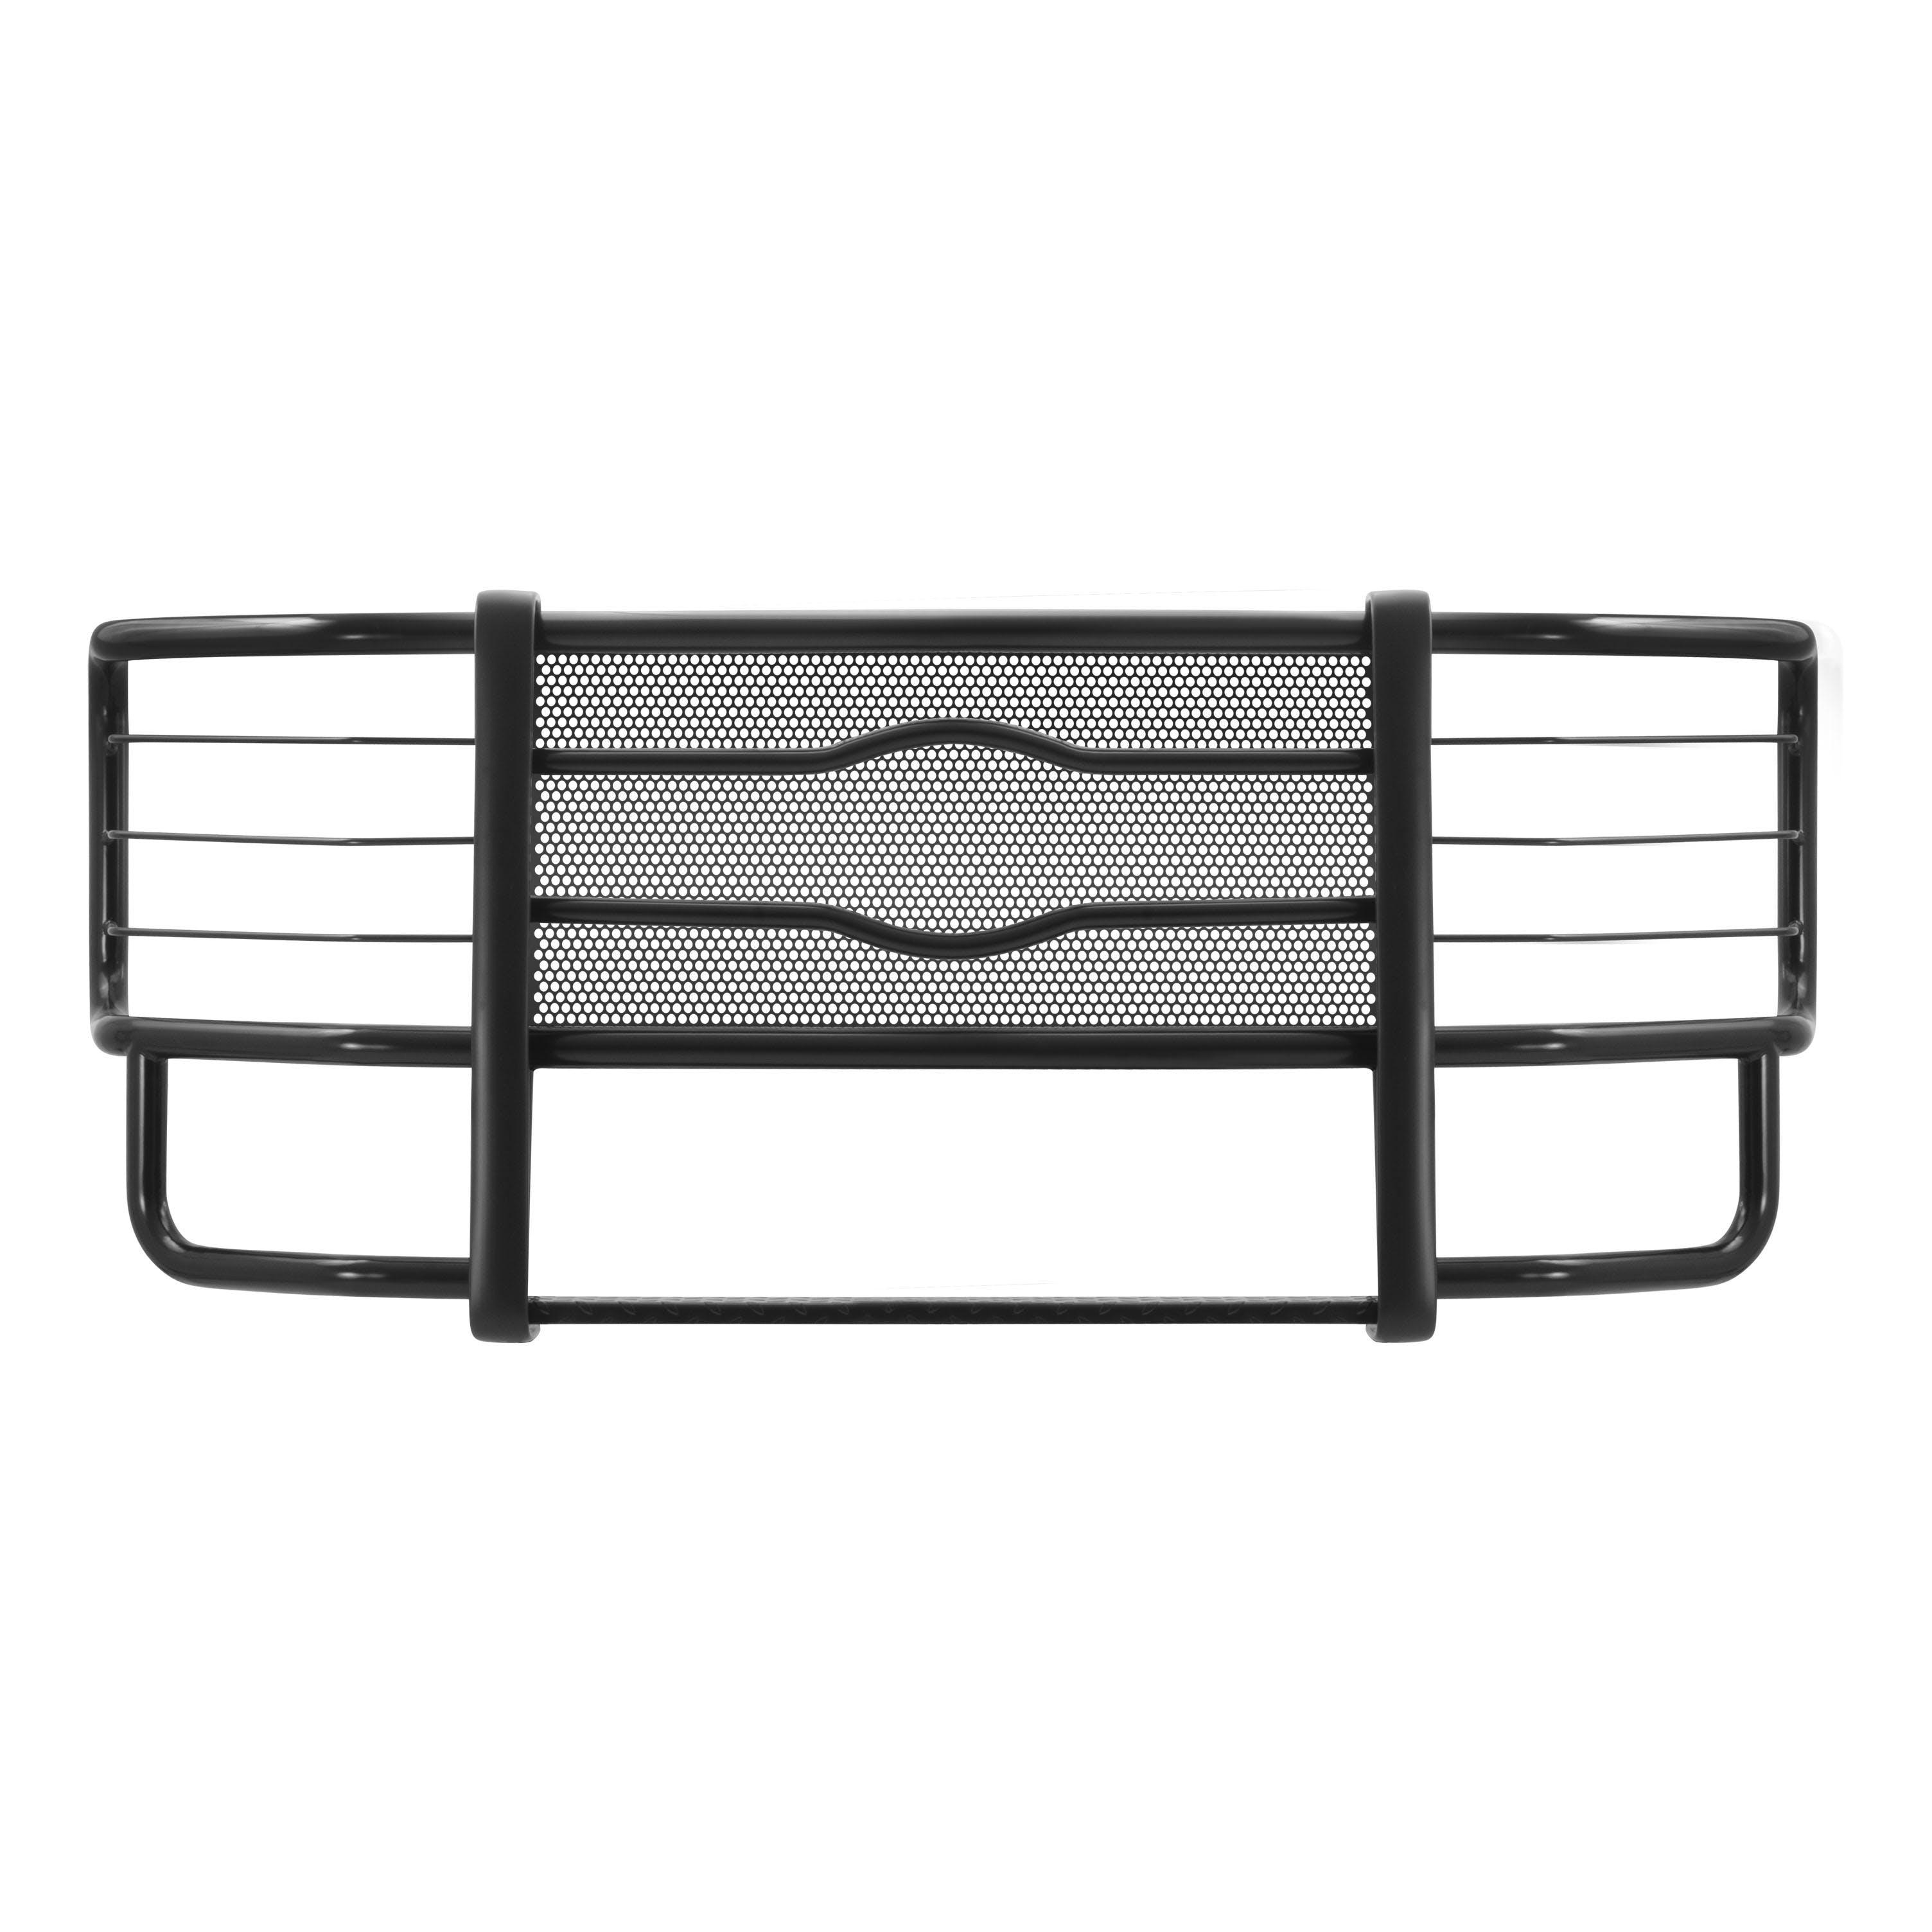 LUVERNE 321123-321122 Prowler Max Grille Guard